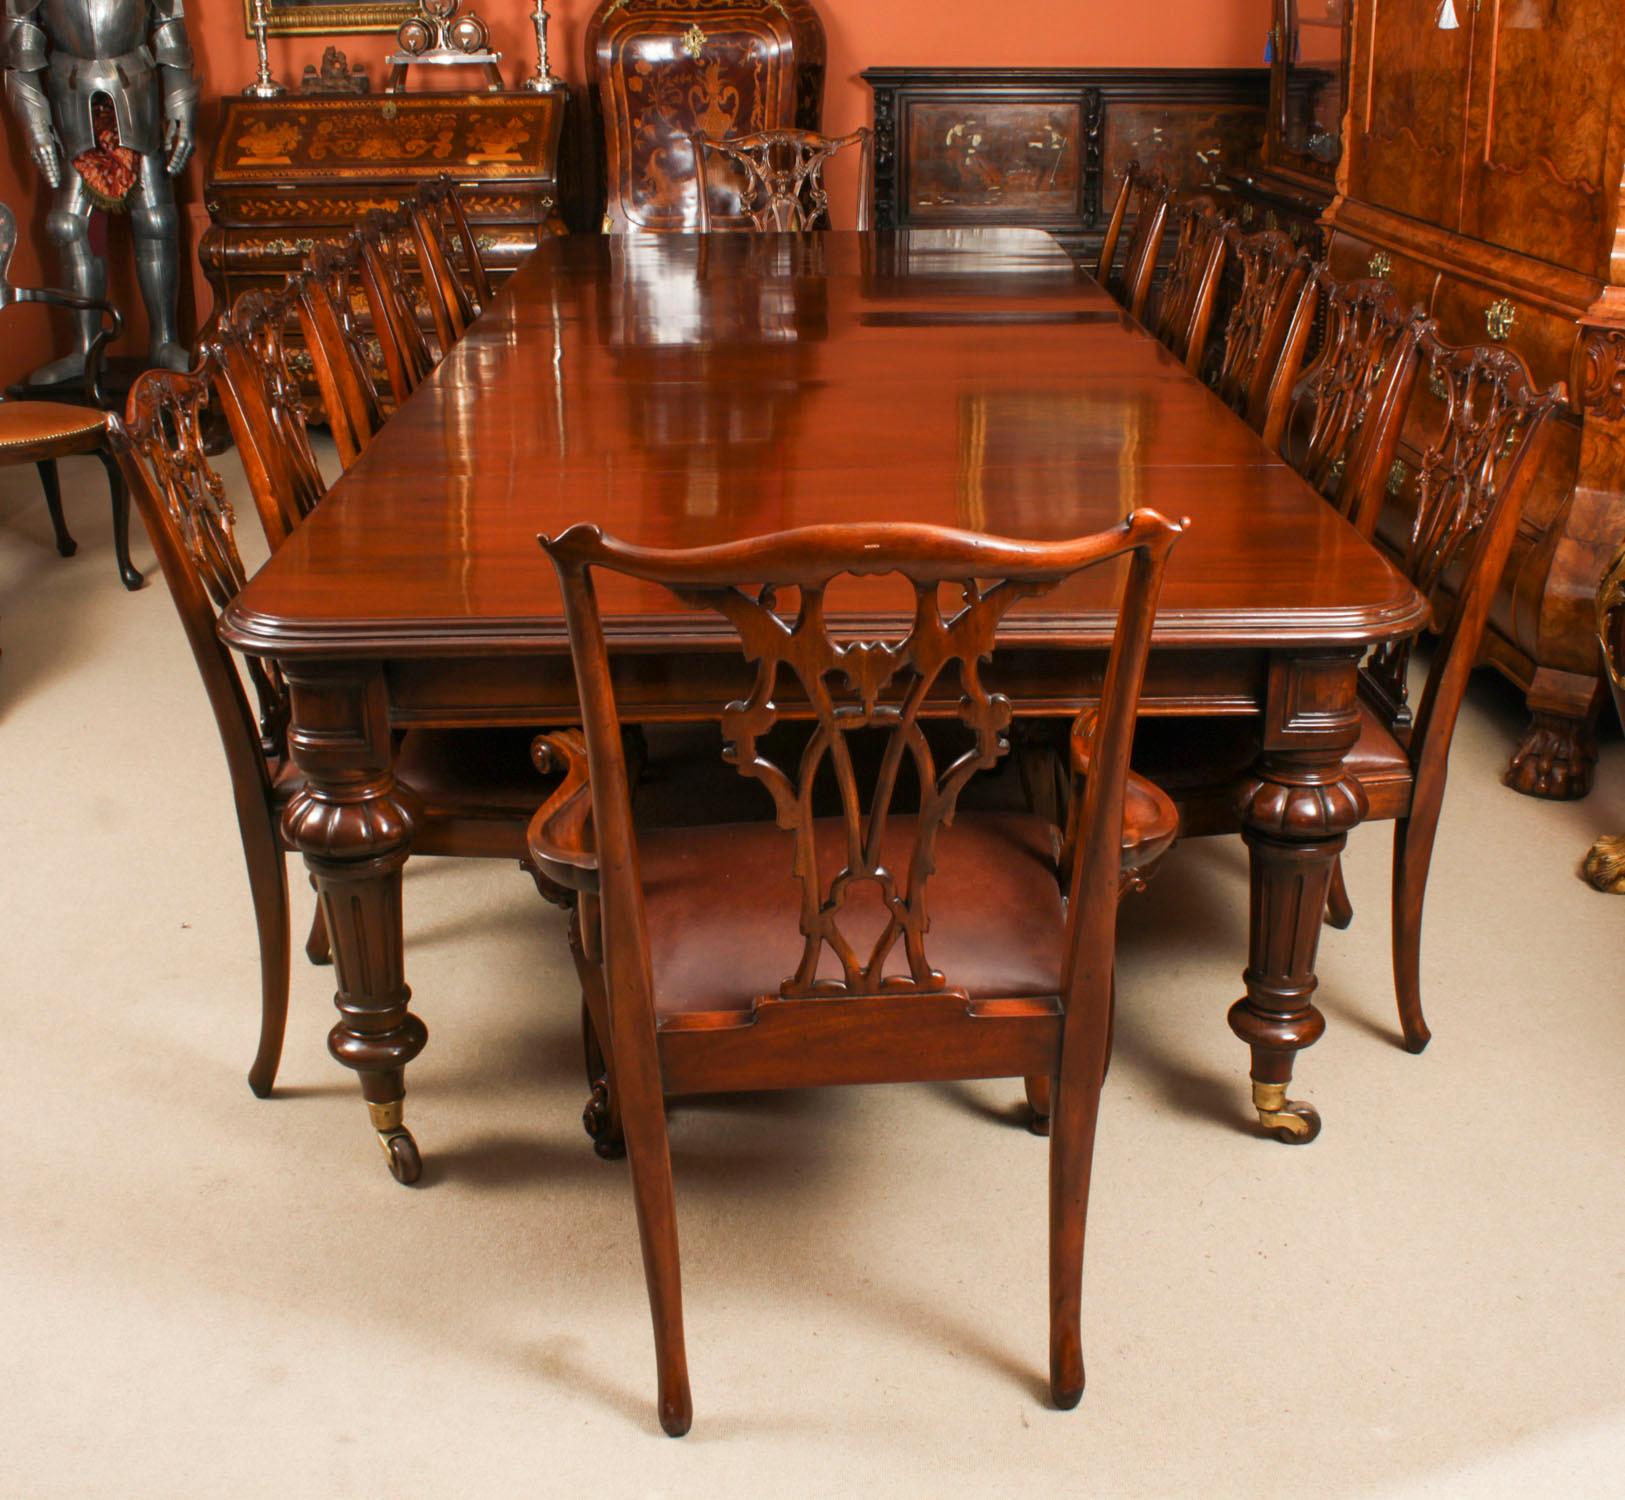 This is a beautiful dining set comprising an antique William IV flame mahogany dining table, Circa 1835 in date, and a beautiful set of twelve Chippendale Revival  dining chairs.
 
This amazing table can seat up to fourteen people in comfort and has